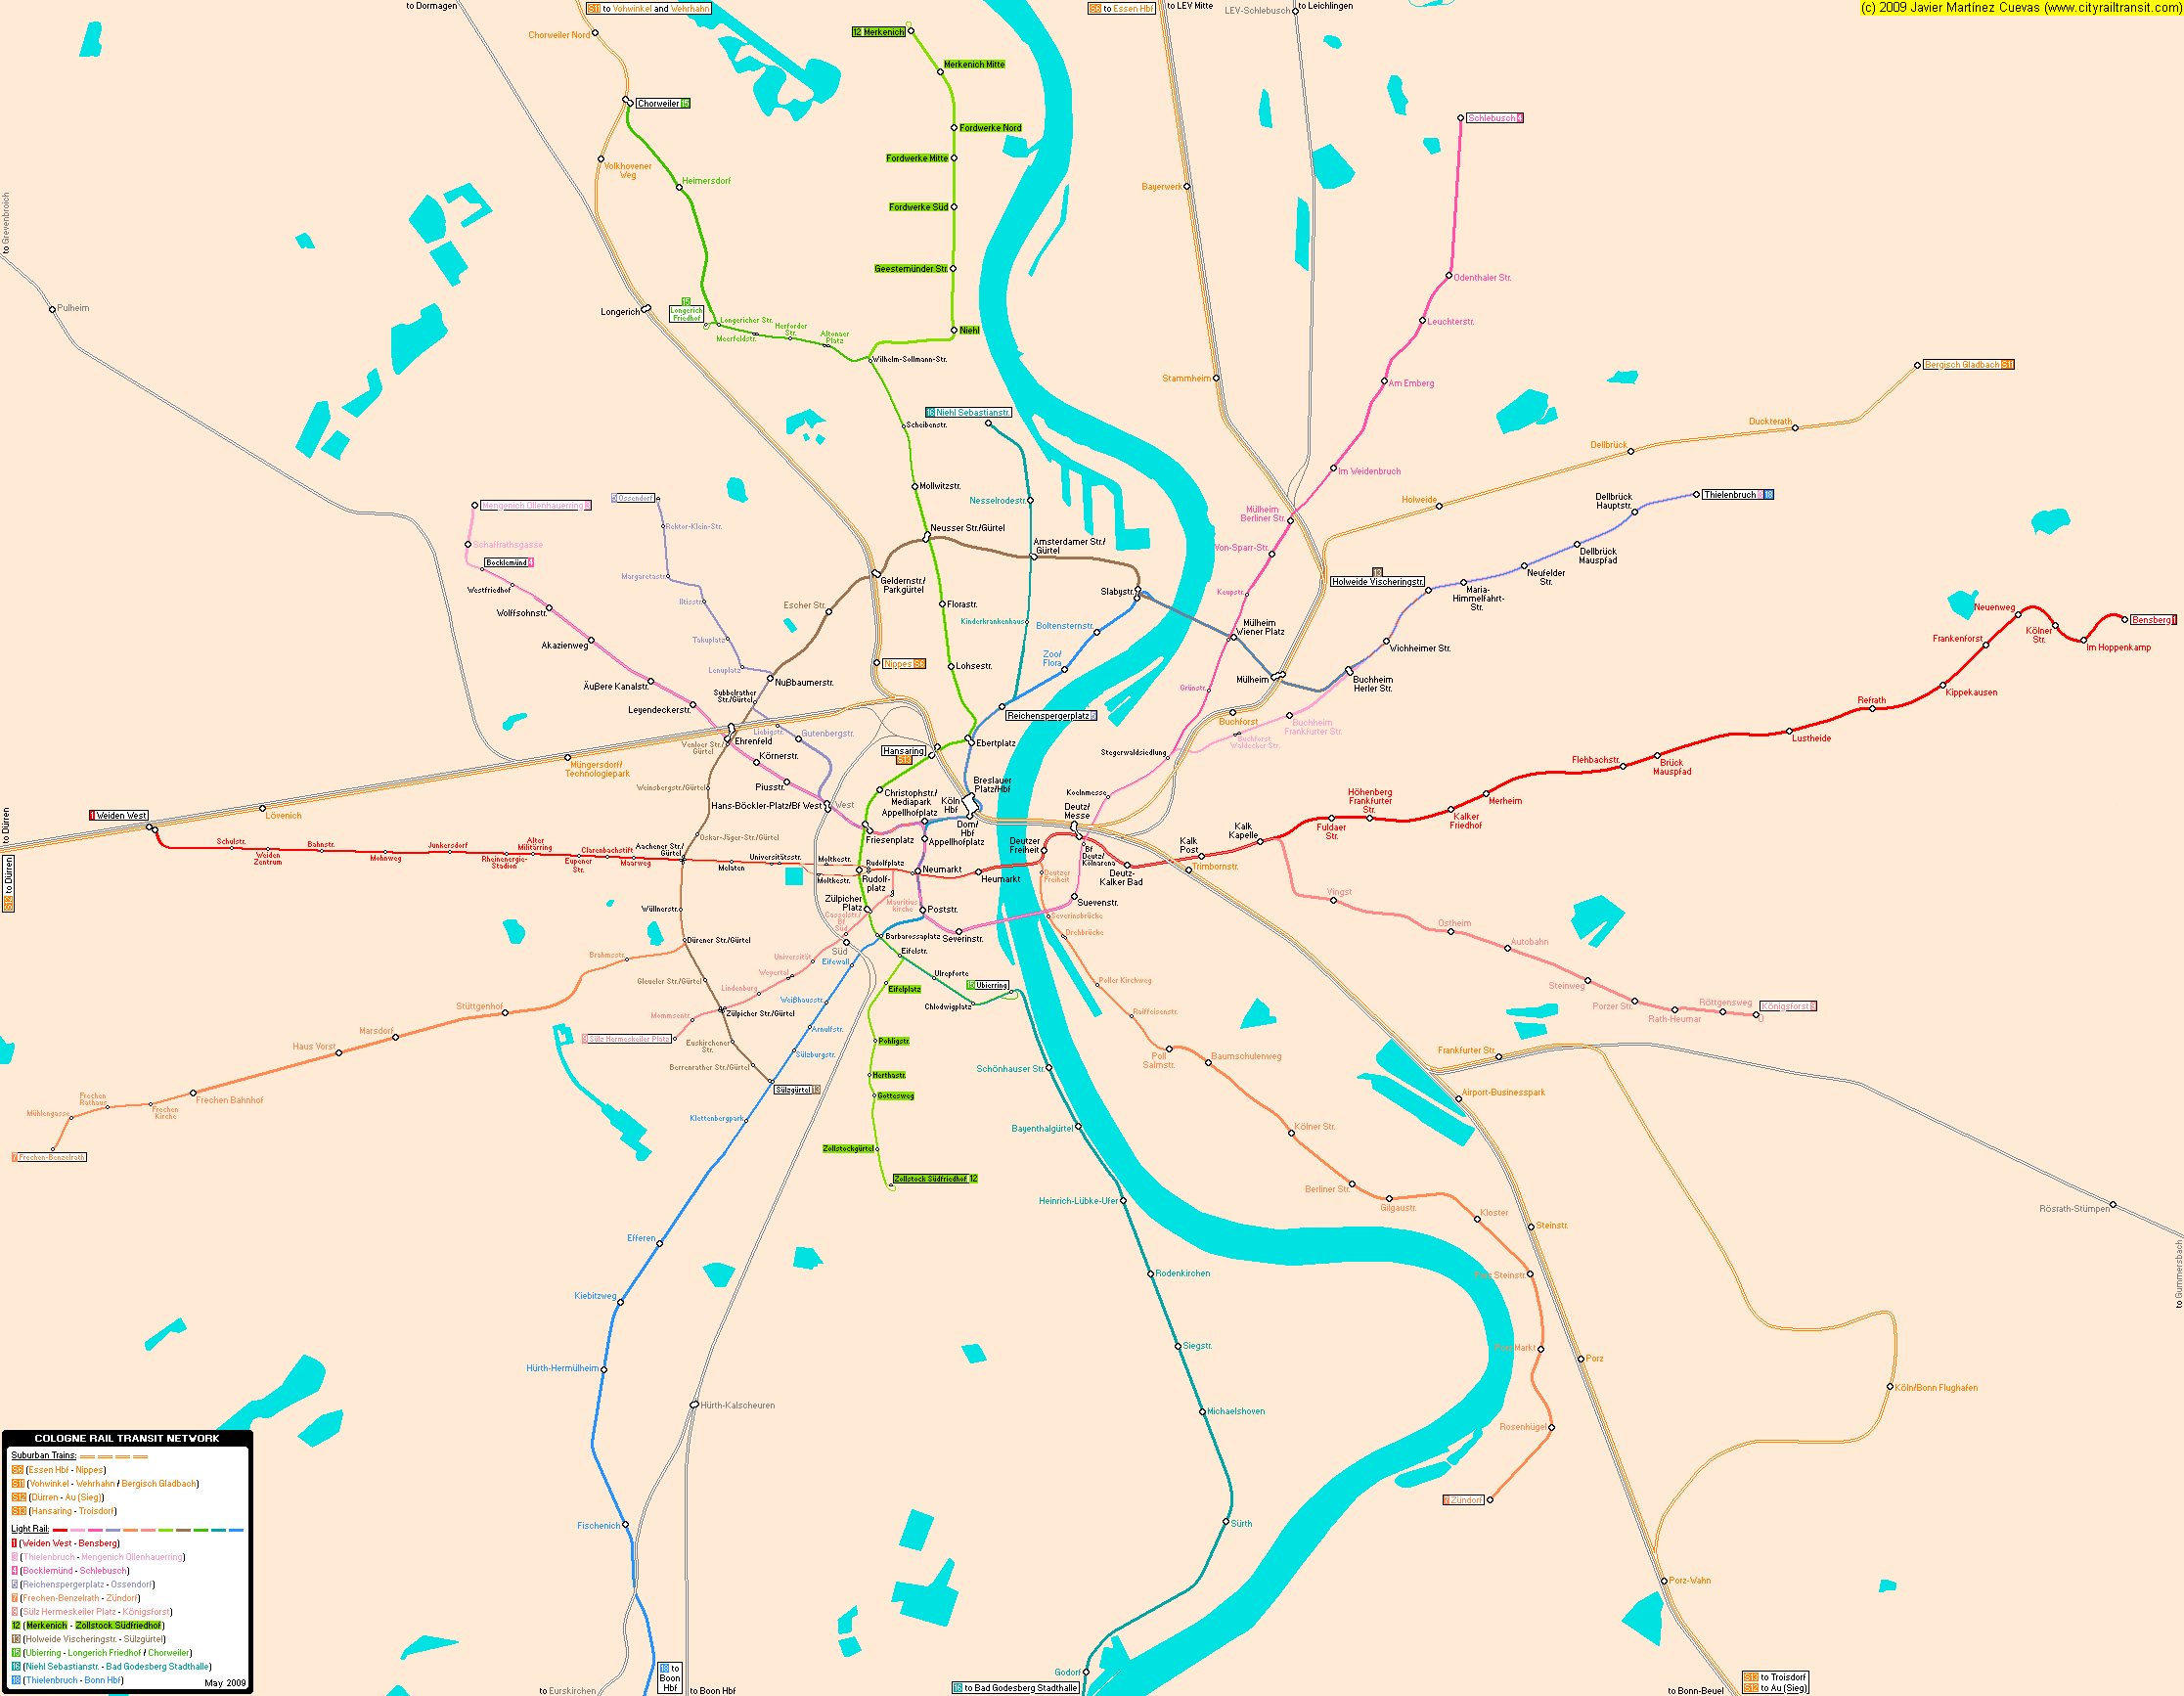 Metro Map of Cologne